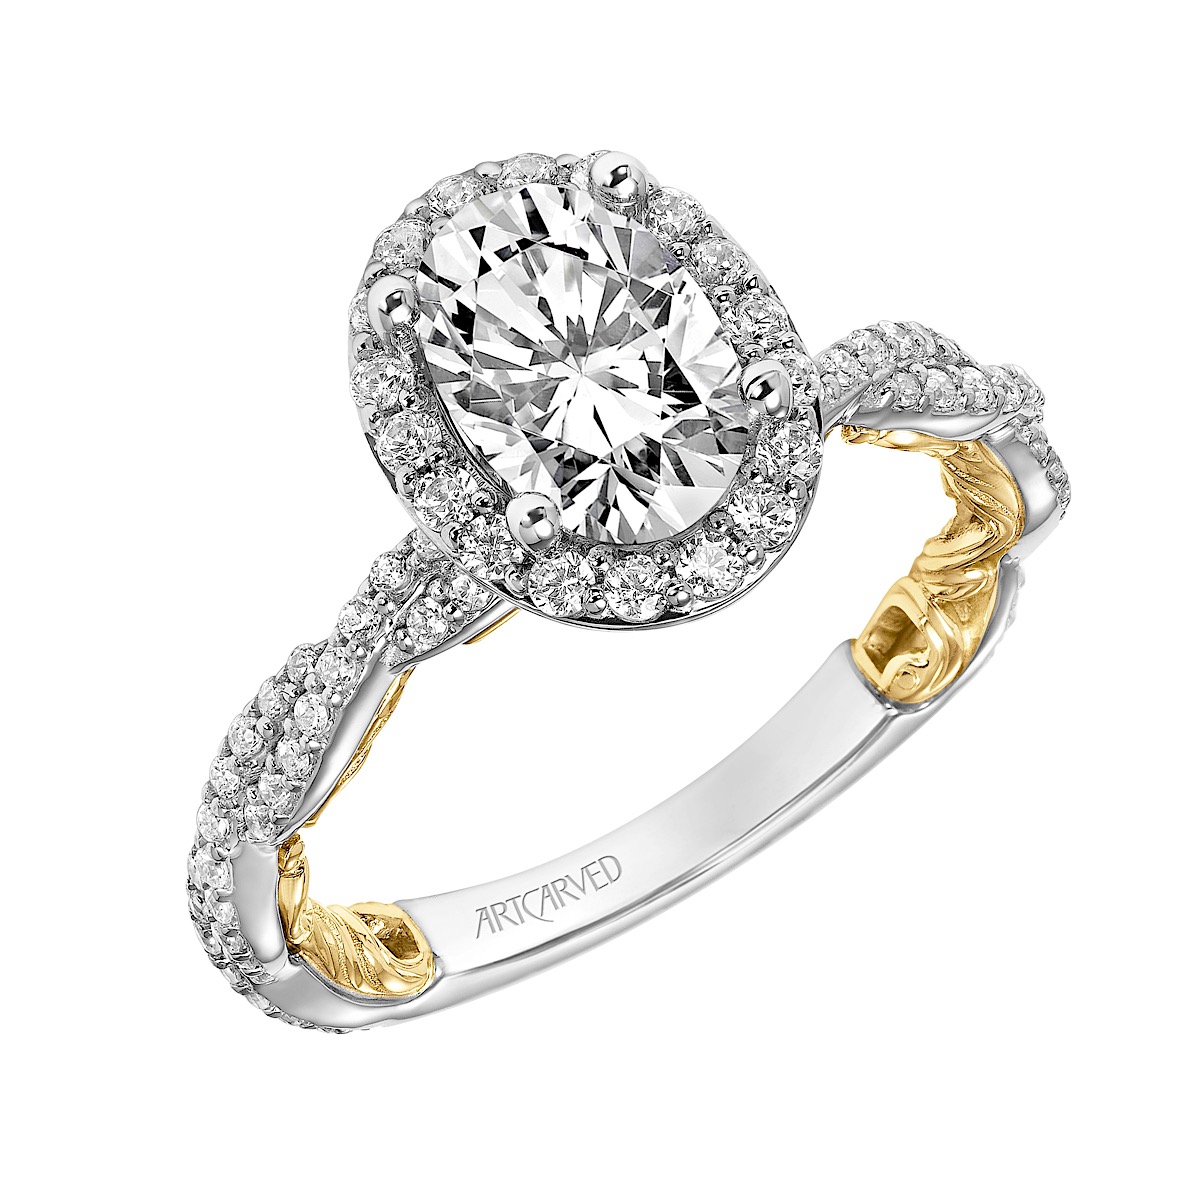 Oval 4-Prong Diamond Engagement Ring